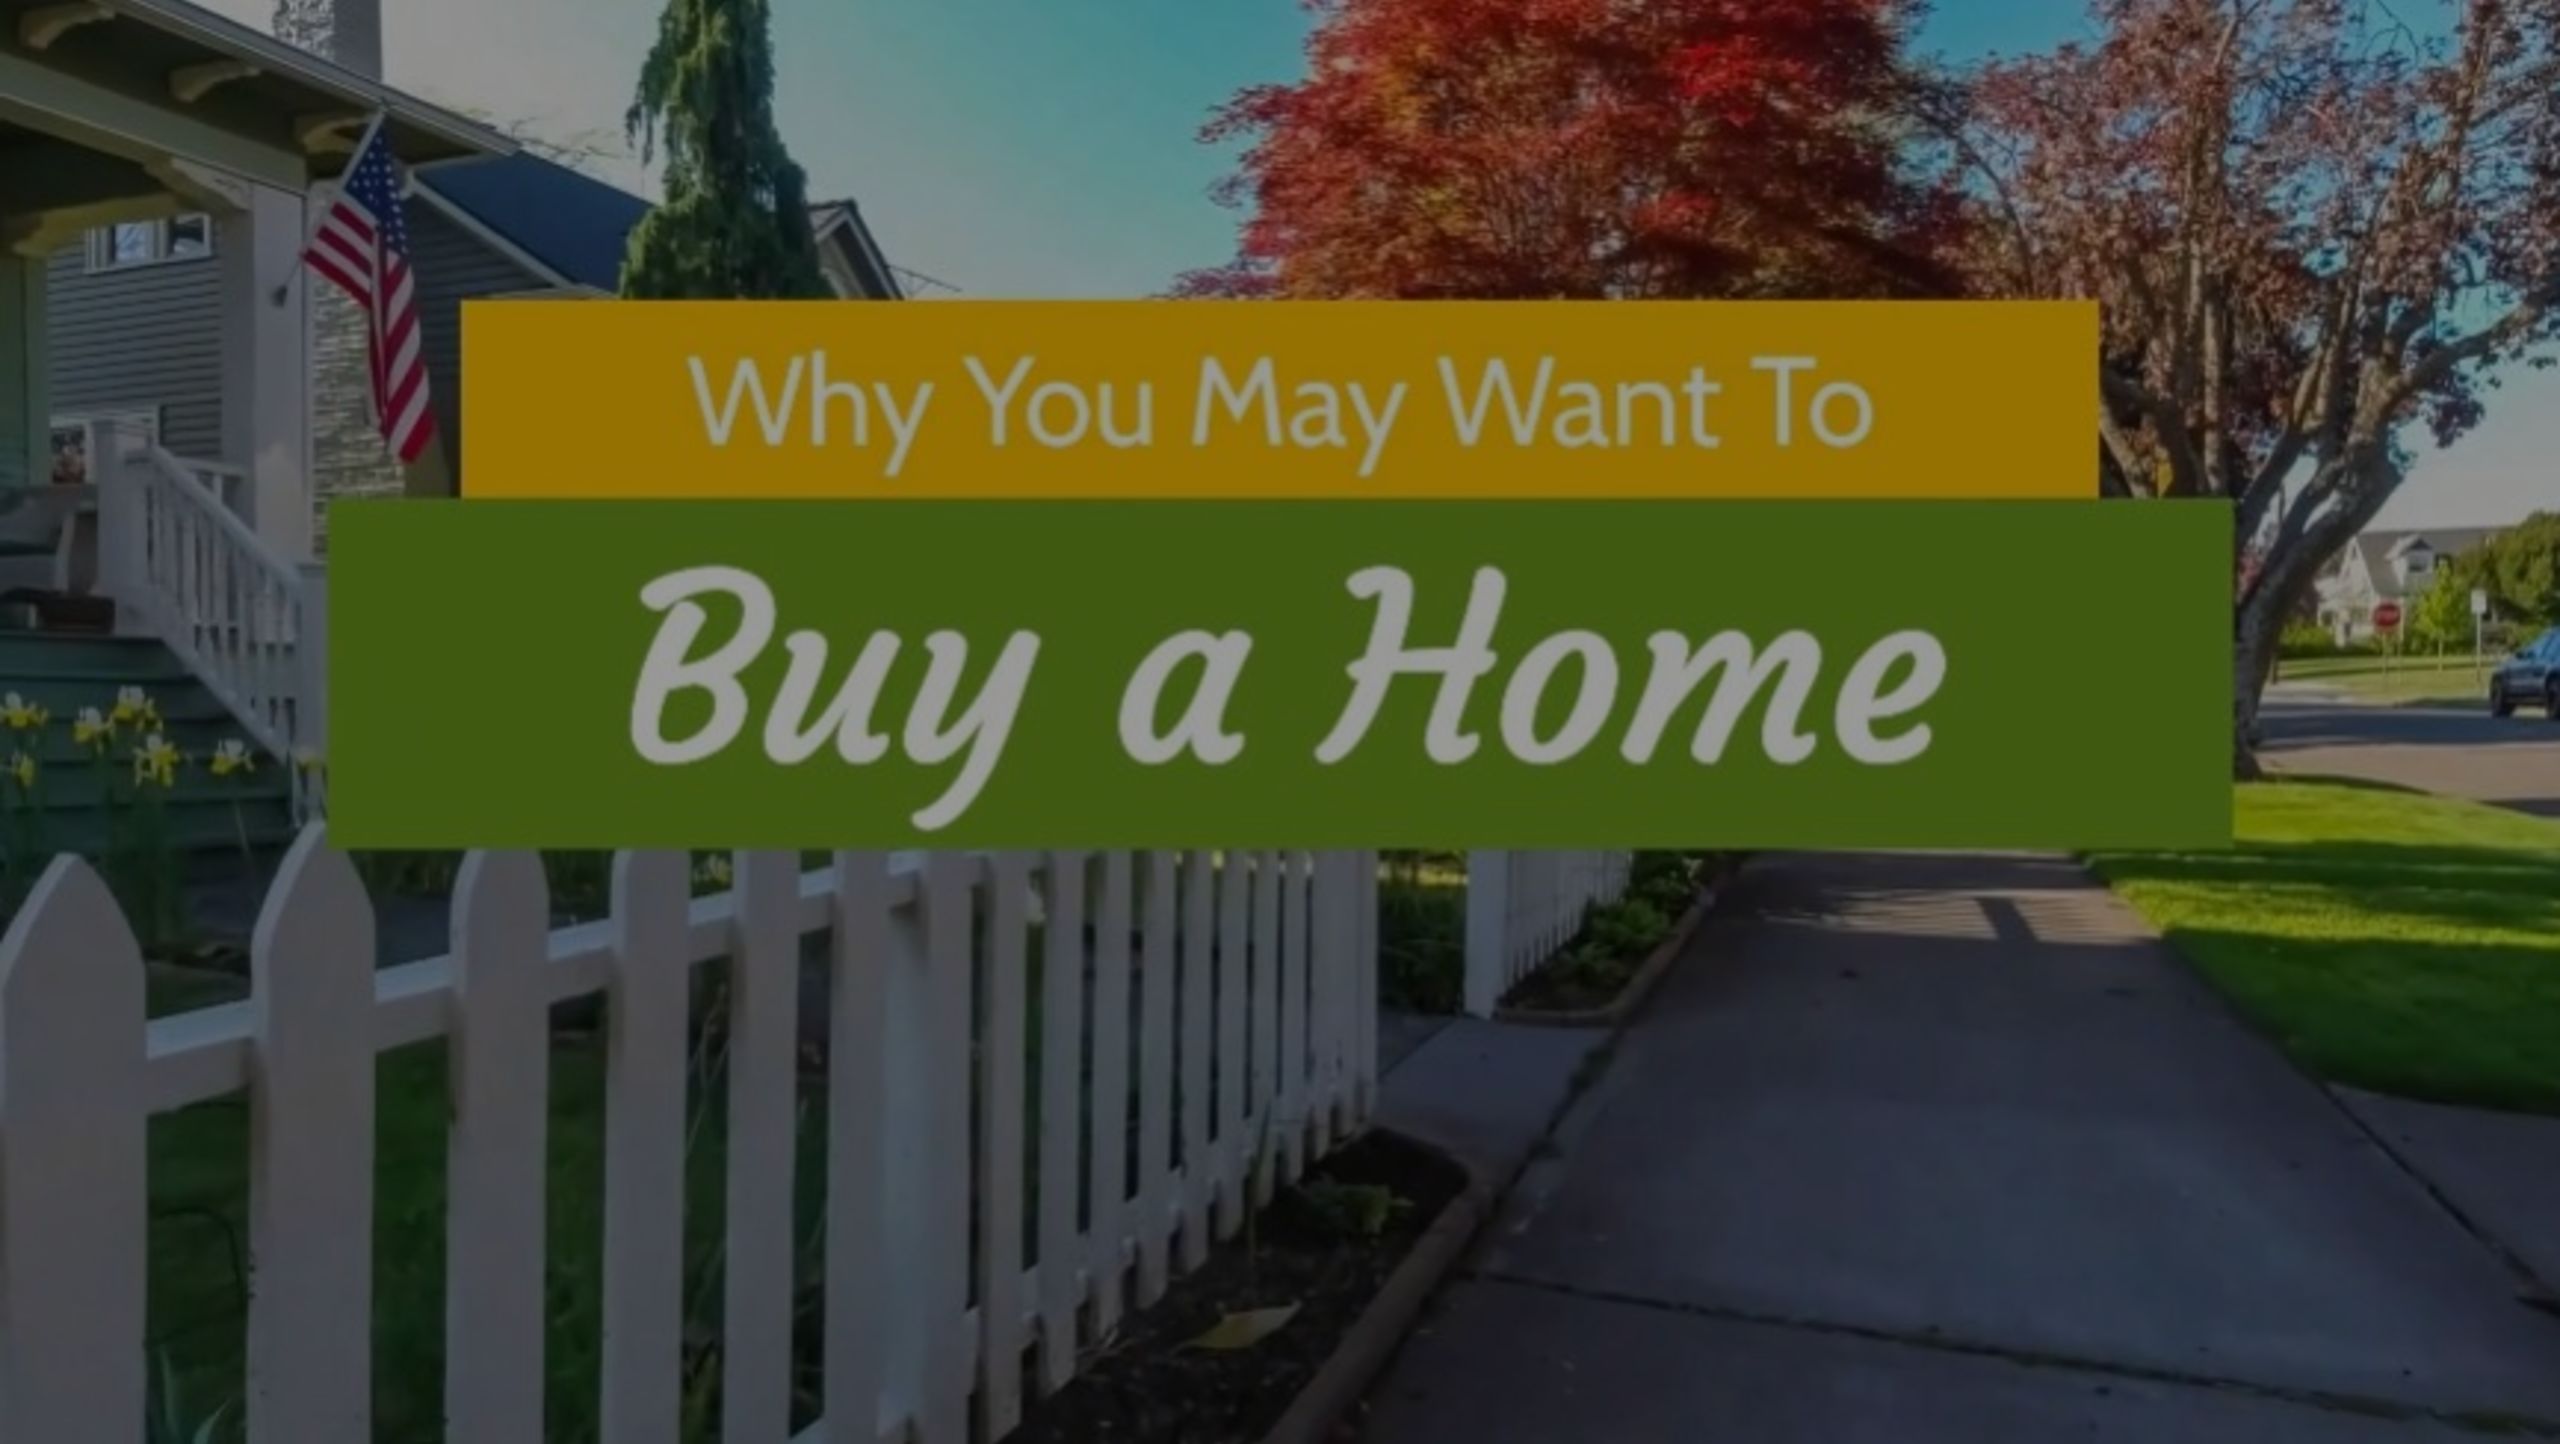 Why You May Want To Buy a Home This Fall